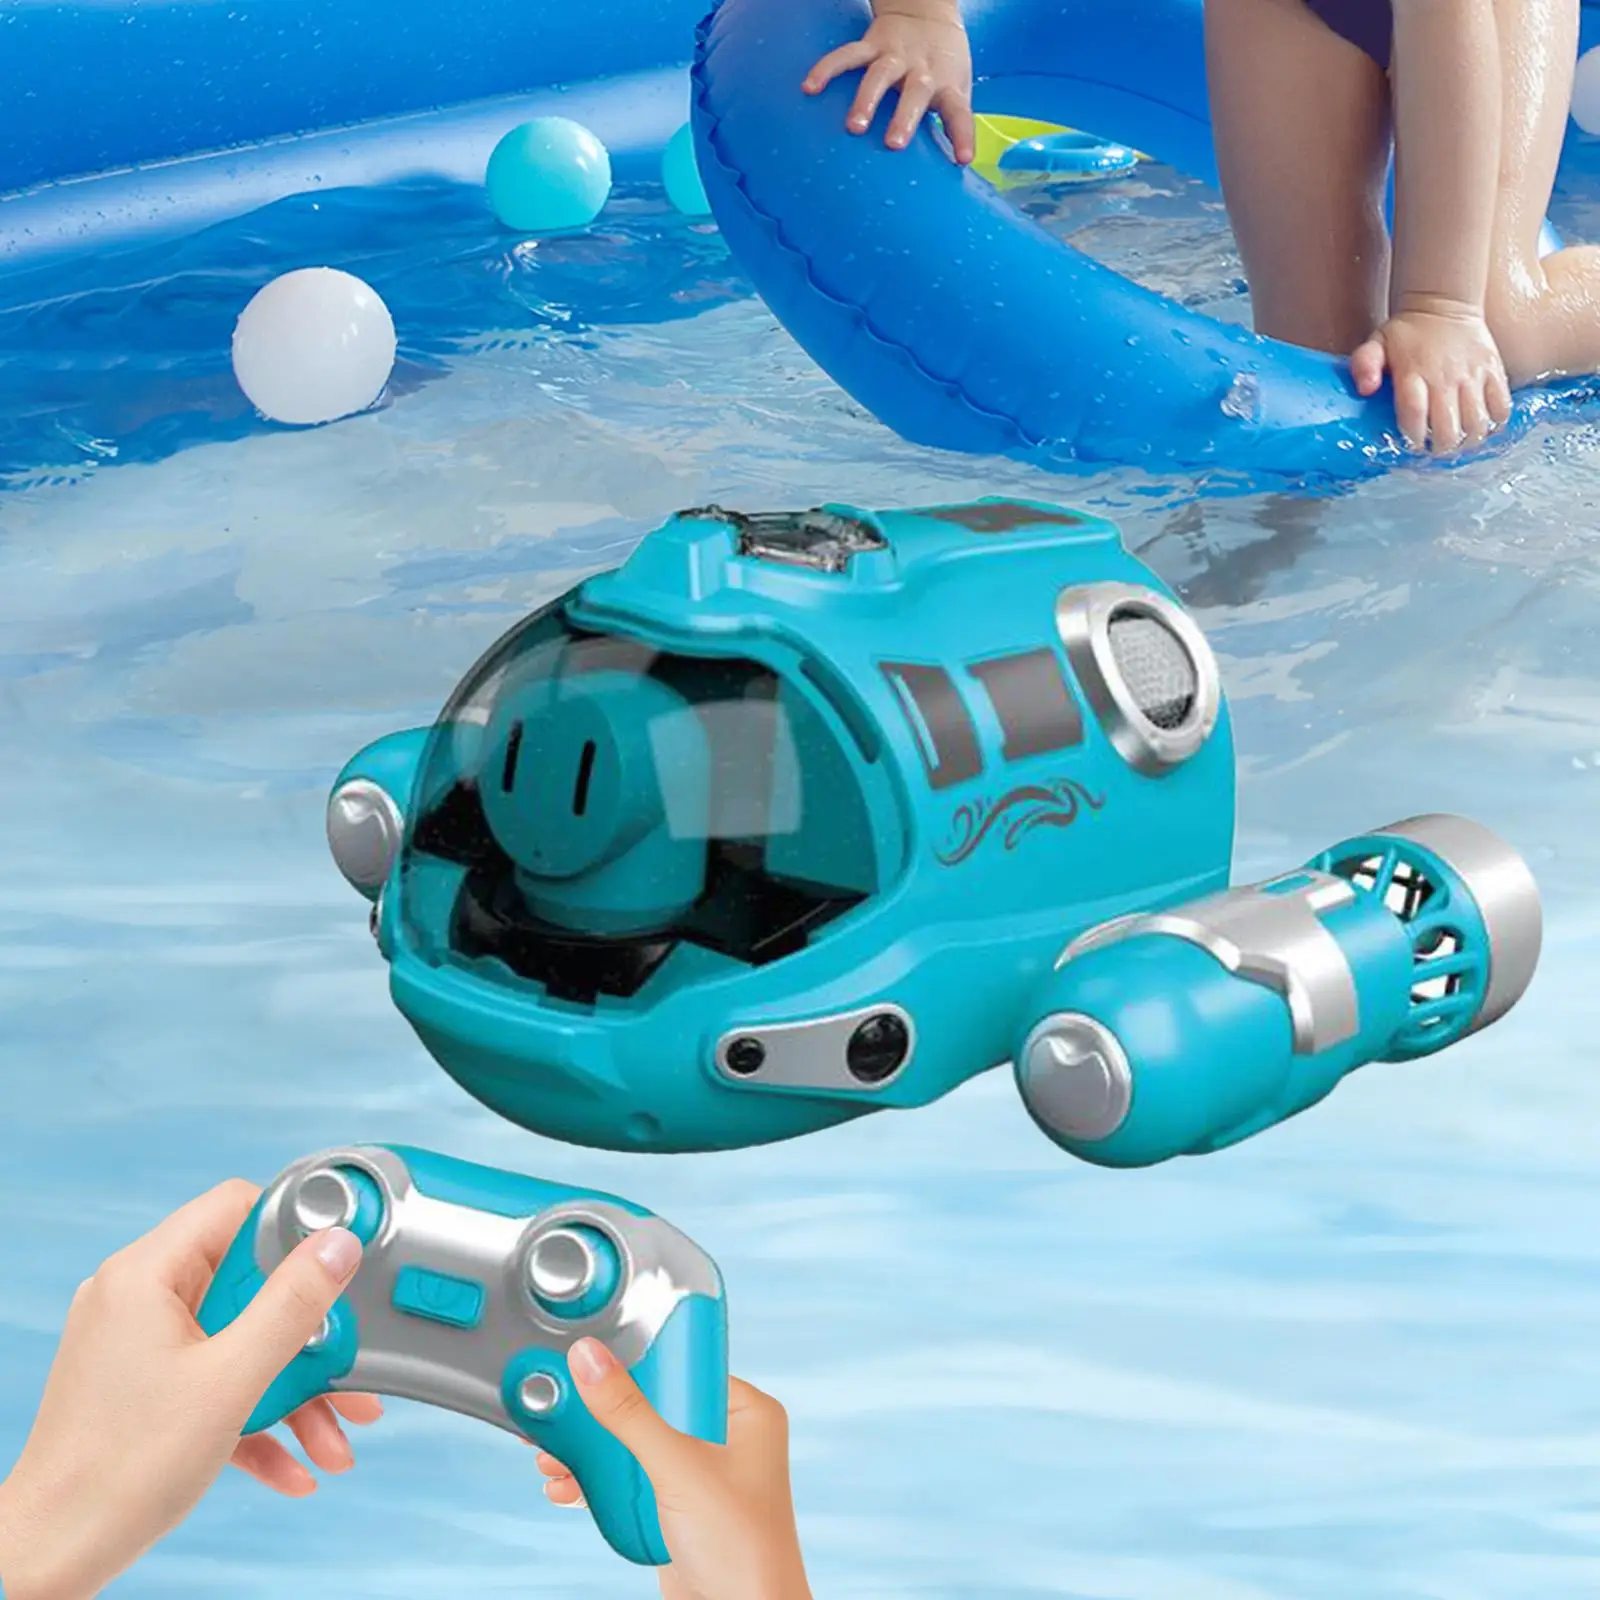 RC Boat Light up RC Boat Water Toy for Park Swimming Pool River